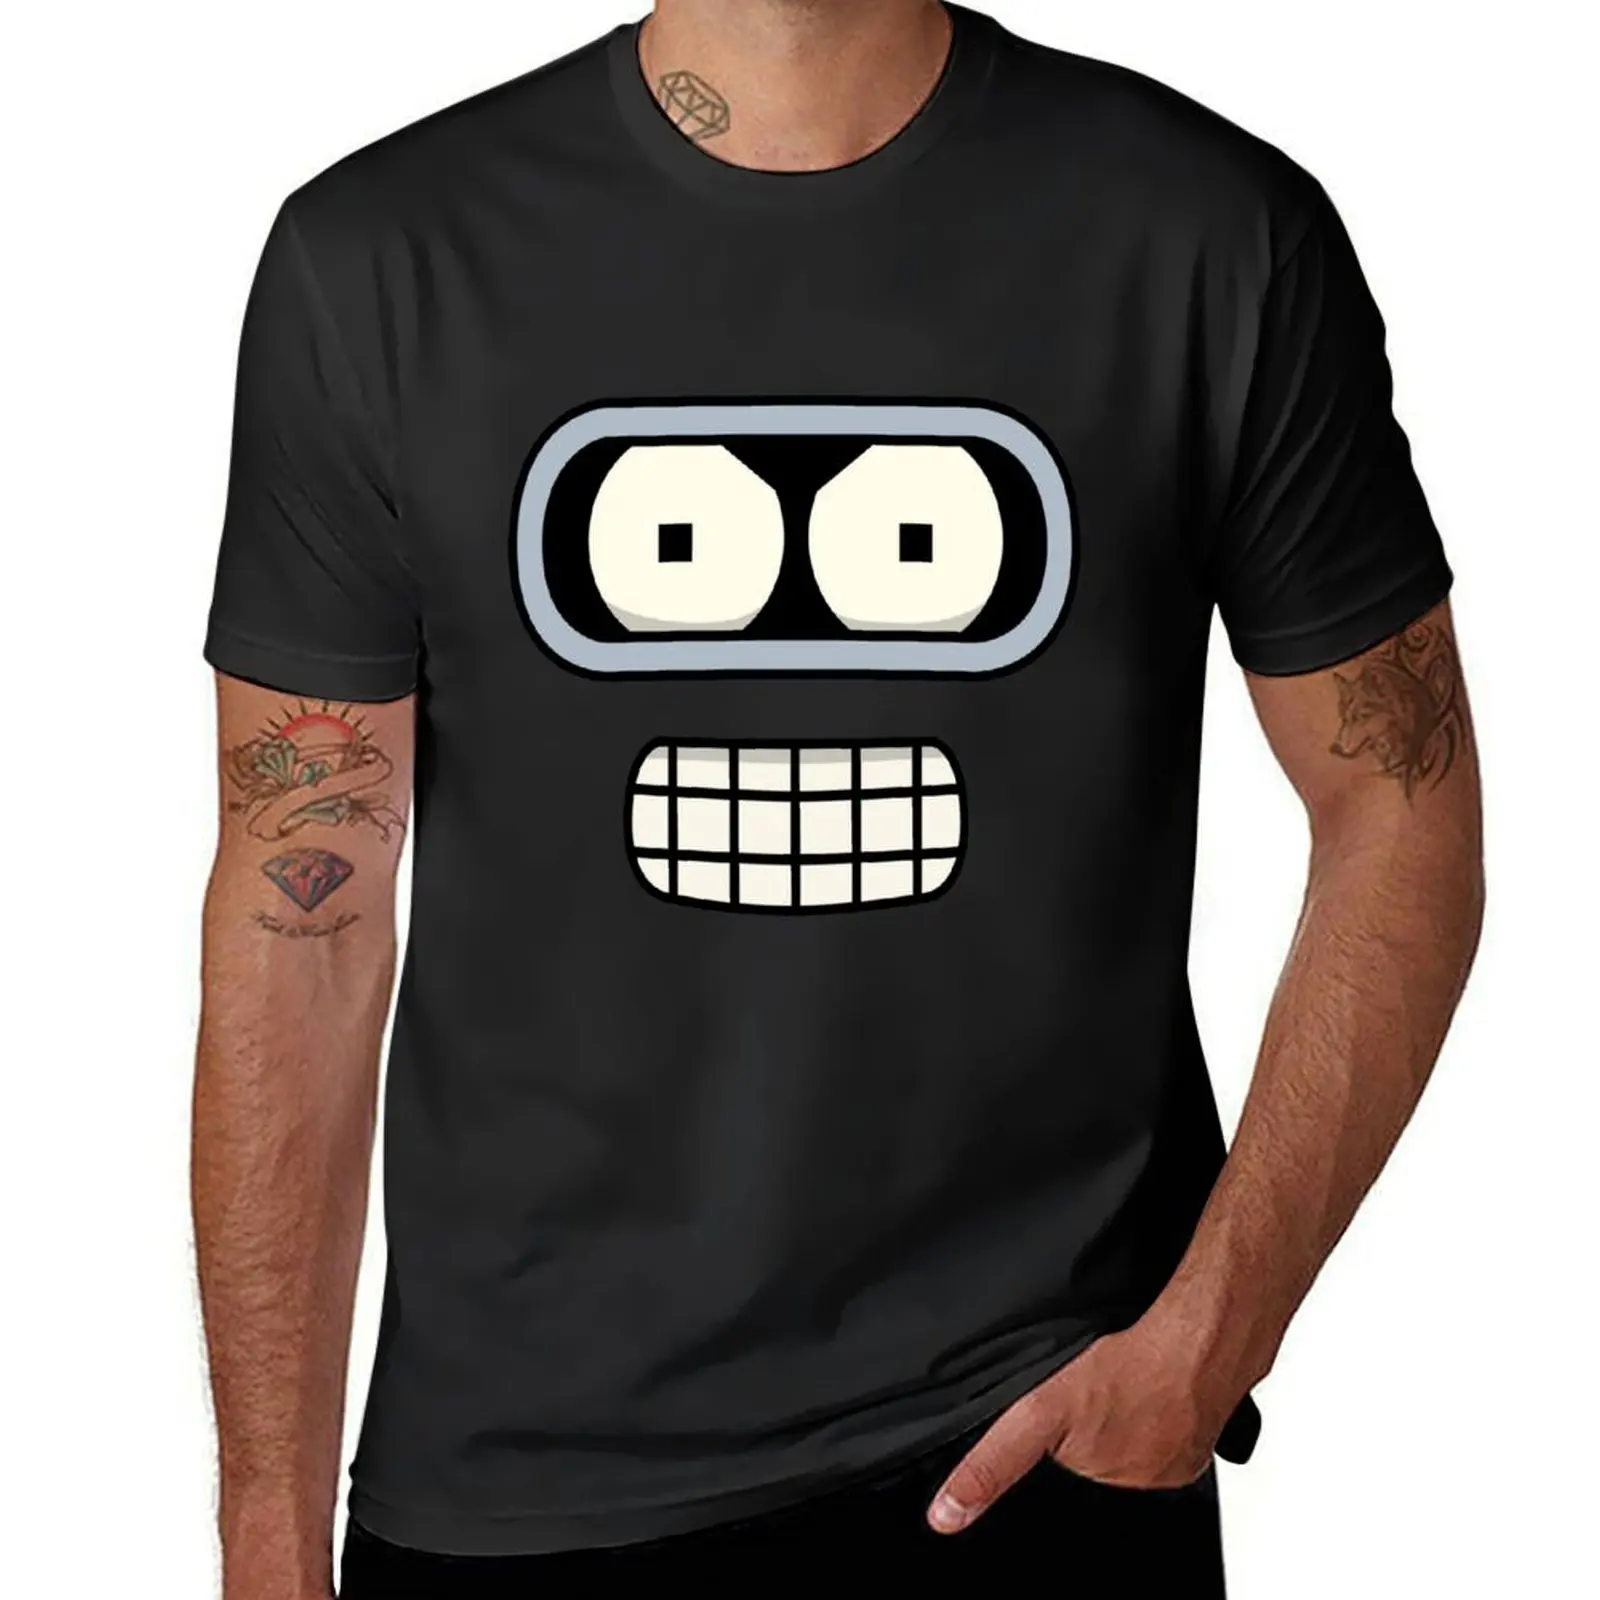 

Bender's Face T-Shirt kawaii clothes anime clothes quick drying heavyweights funny t shirts for men